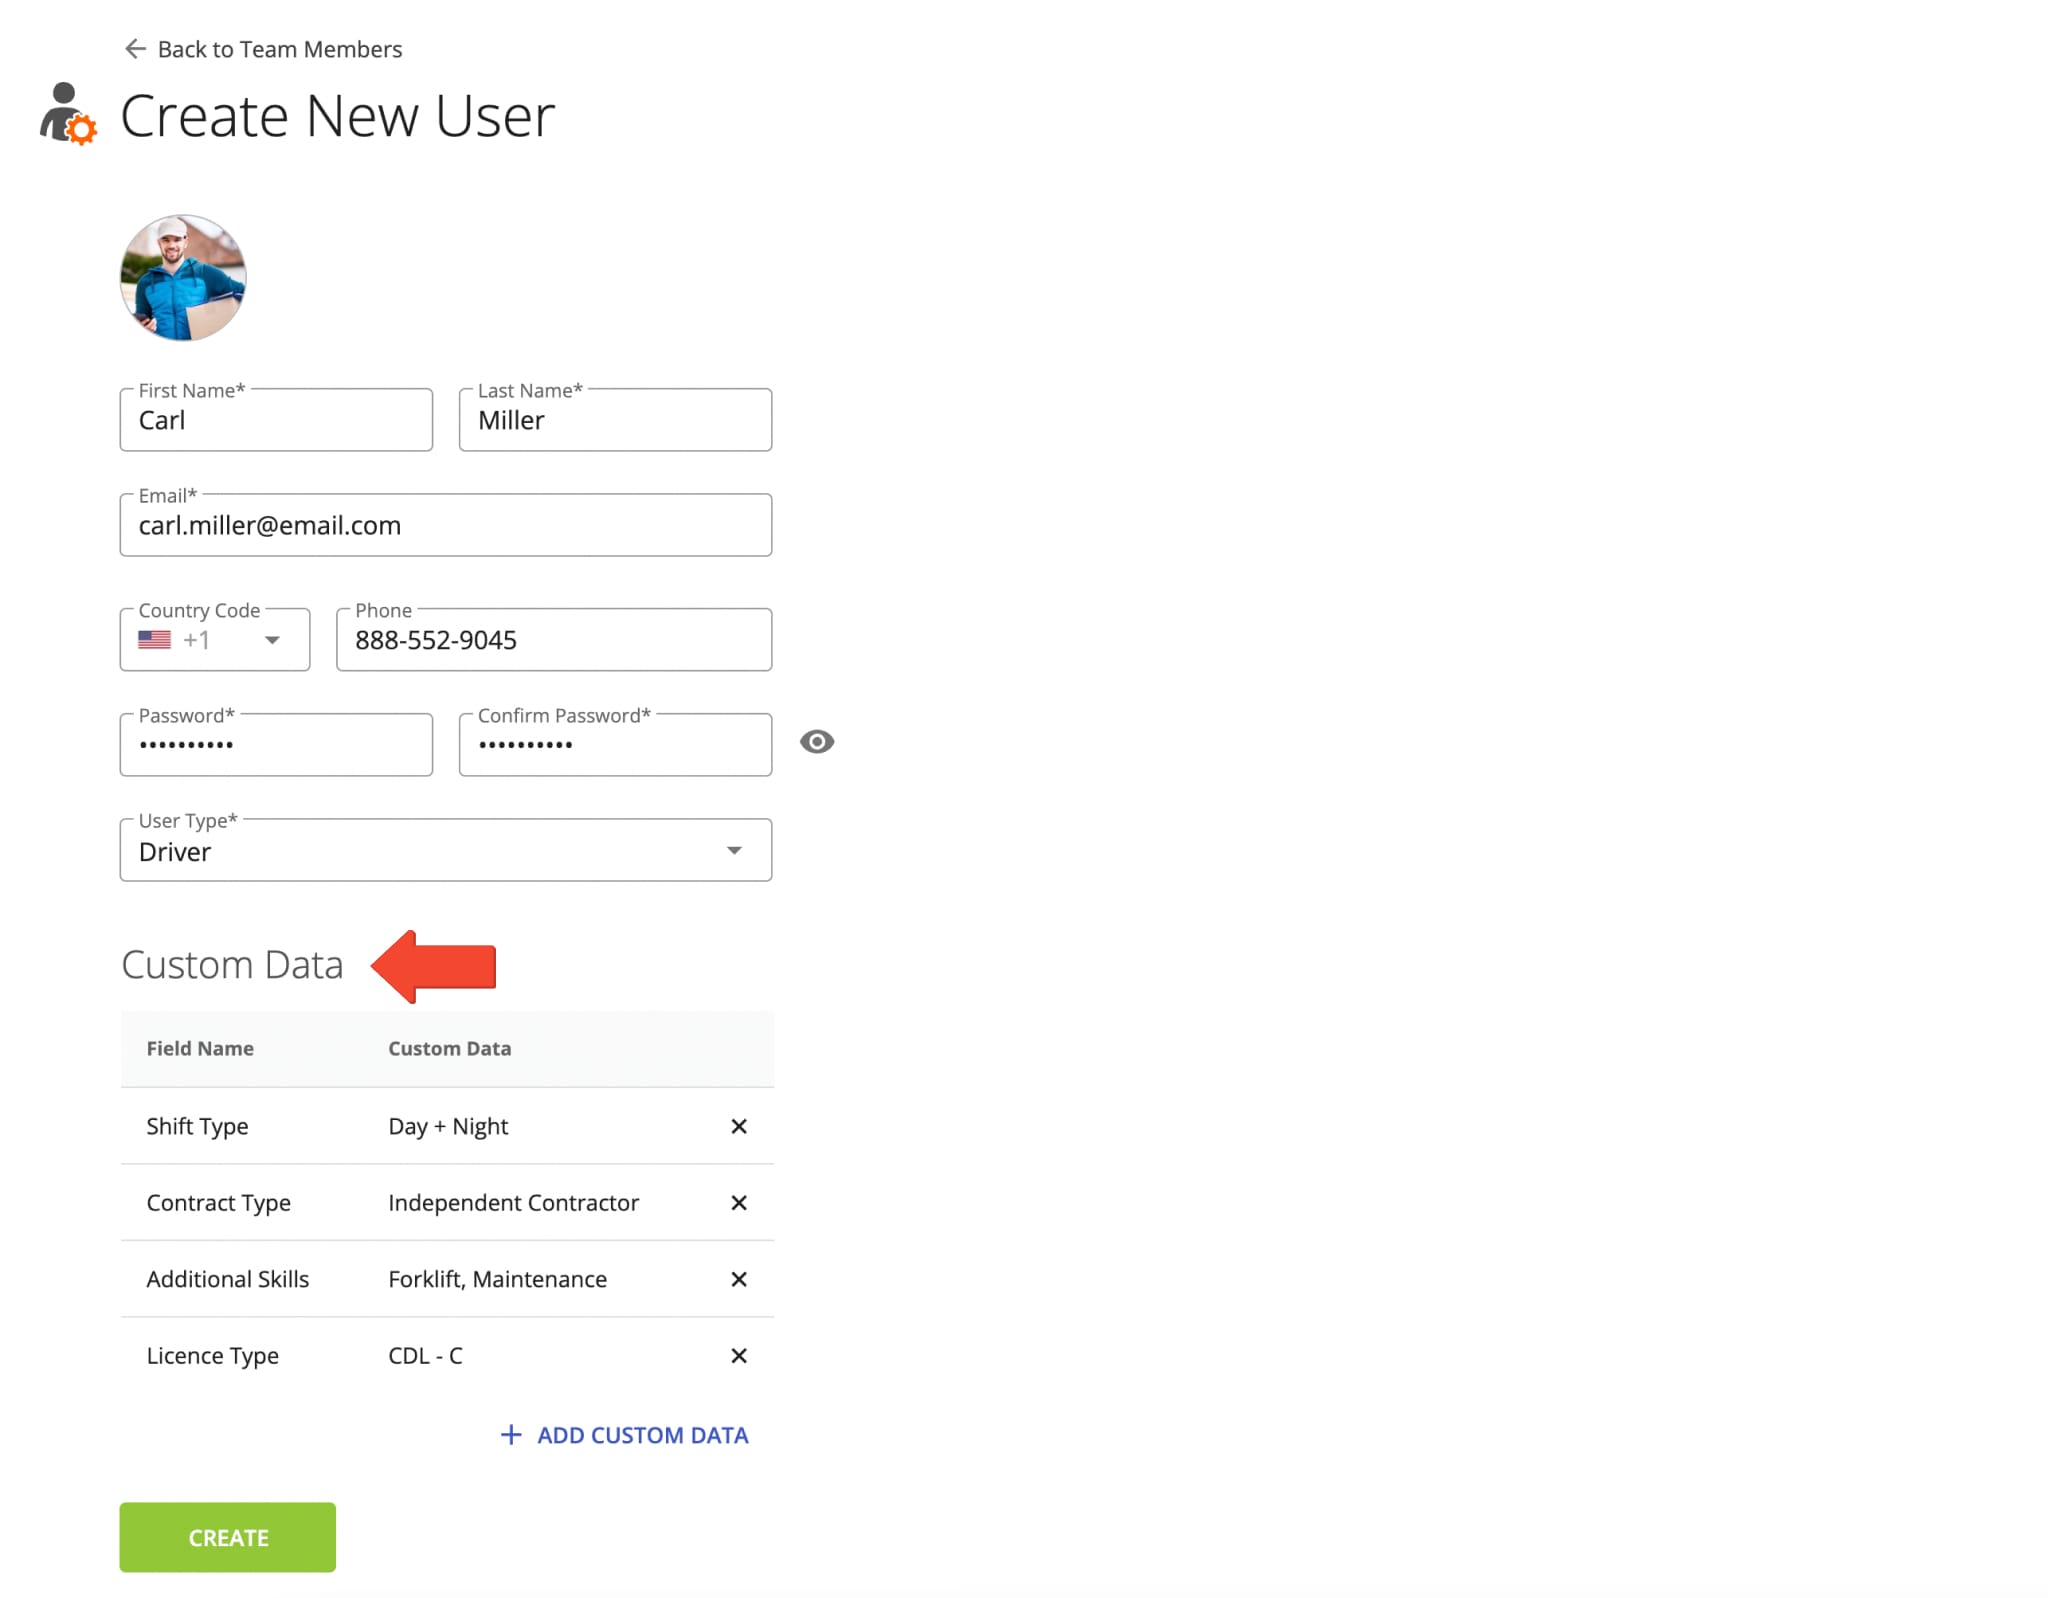 Add Custom Data to the new user to attach additional driver, manager, route planner, or other team member details that don't fit into reserved fields.